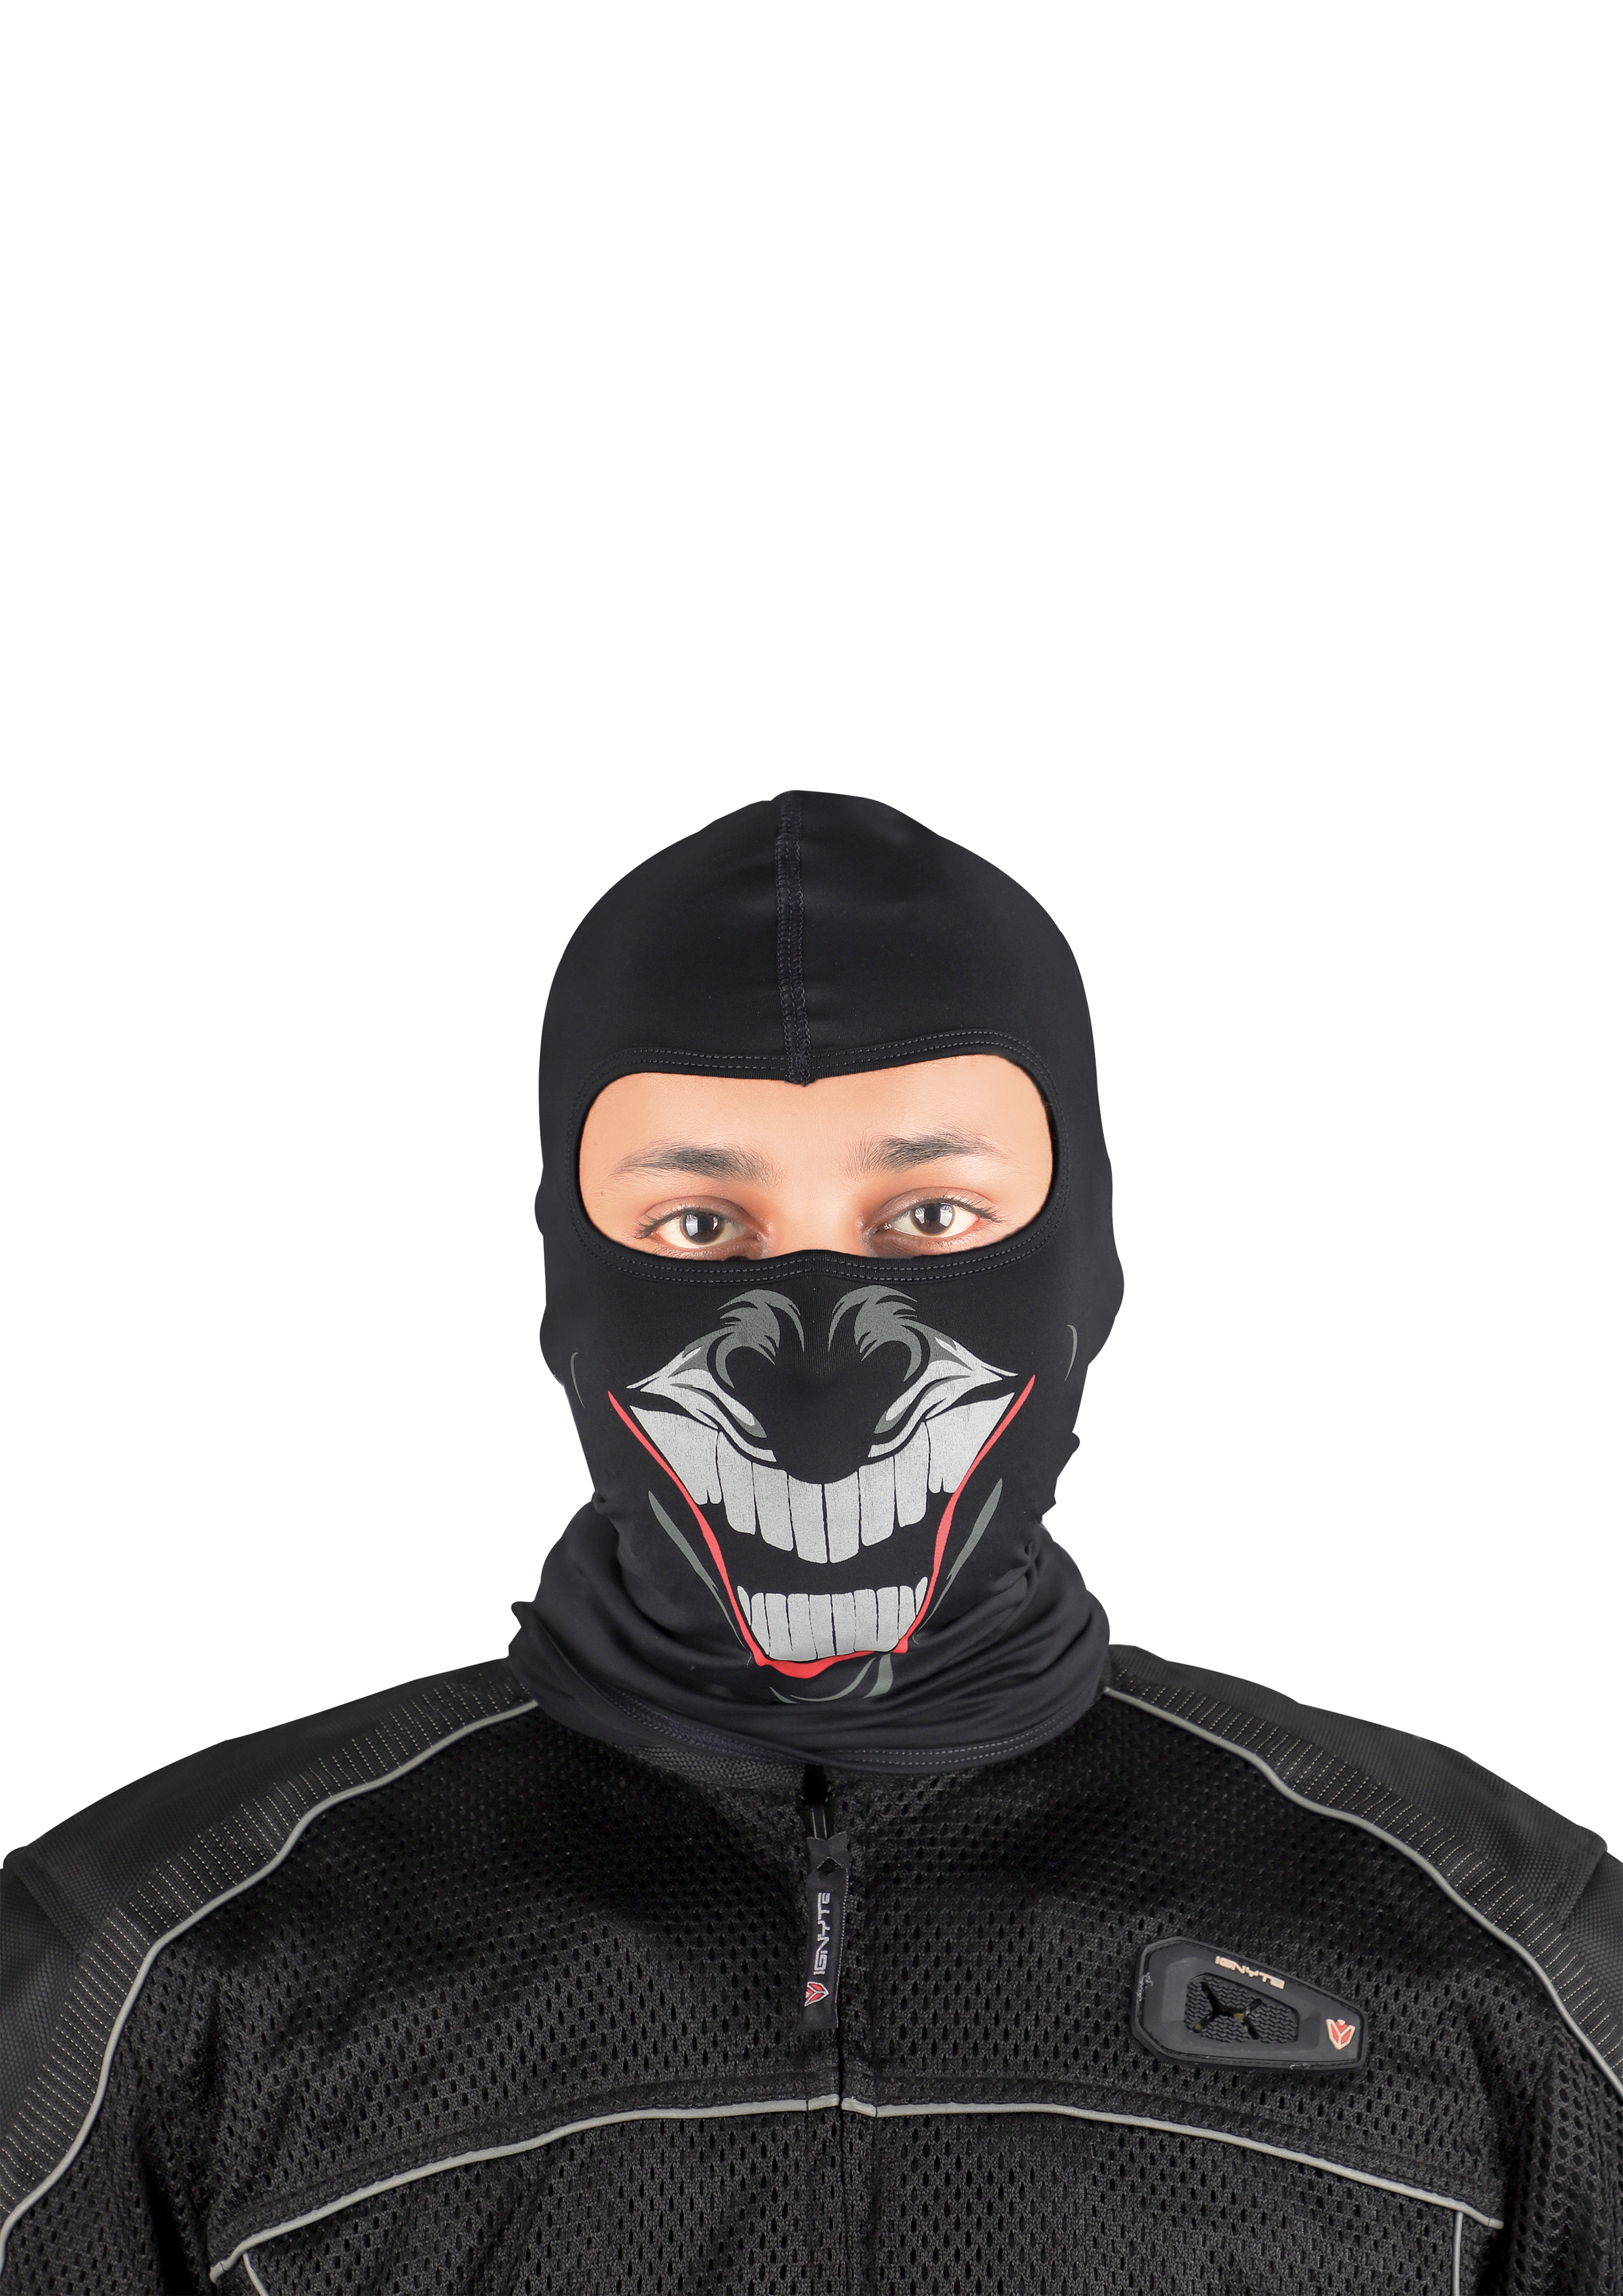 Steelbird Soft Lycra Balaclava Most Suitable For Motorcycling, Running, Sports, Head And Face Cover (Clown Black)